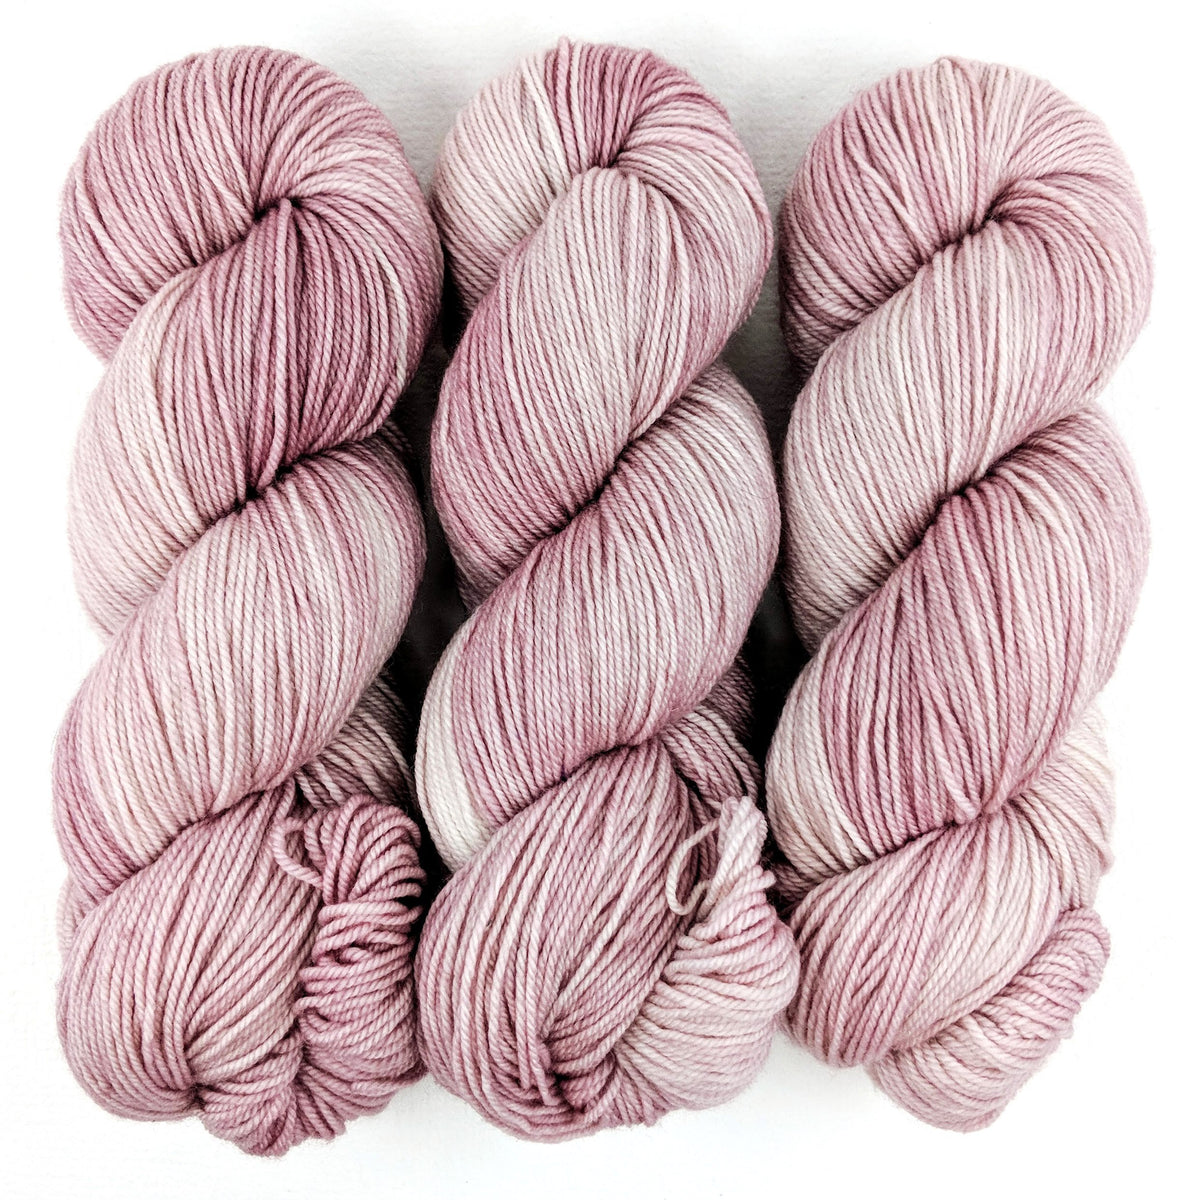 Apple Blossom - Revival Worsted - Dyed Stock